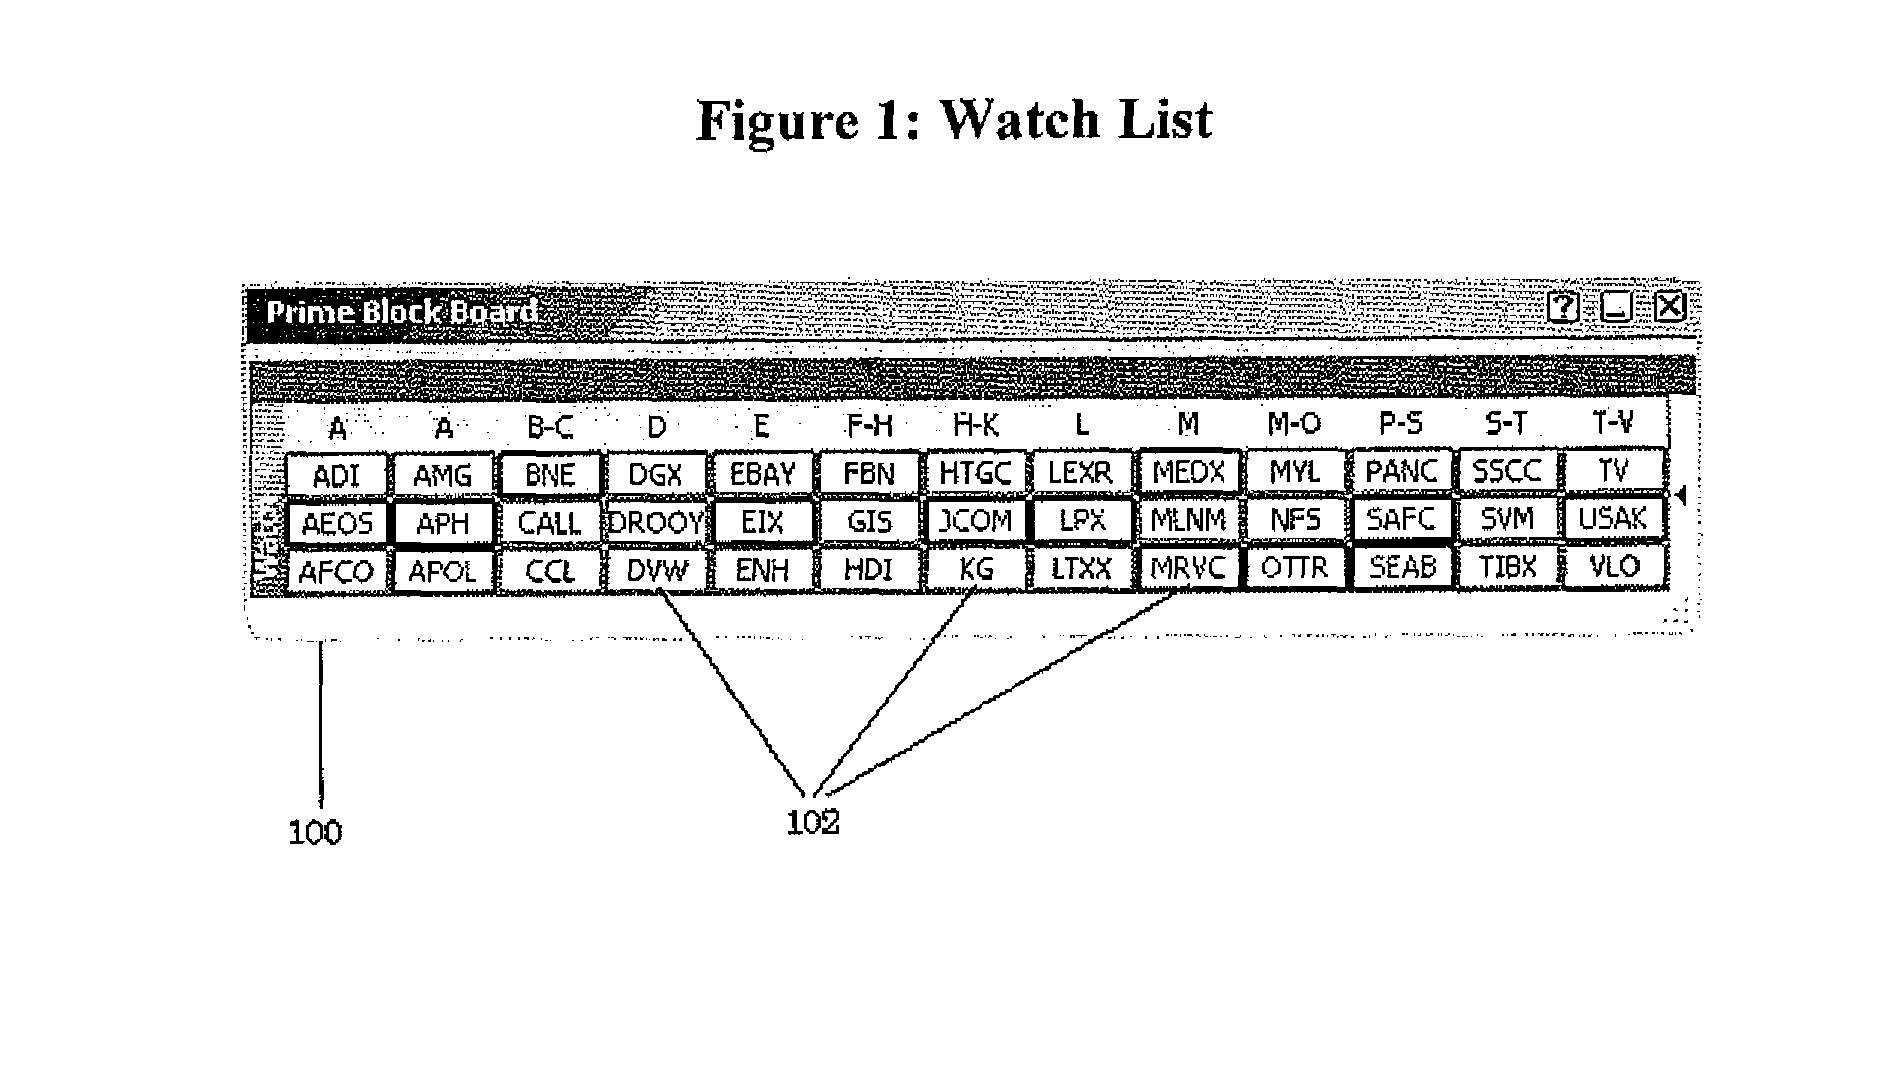 Display of selected items in visual context in algorithmic trading engine